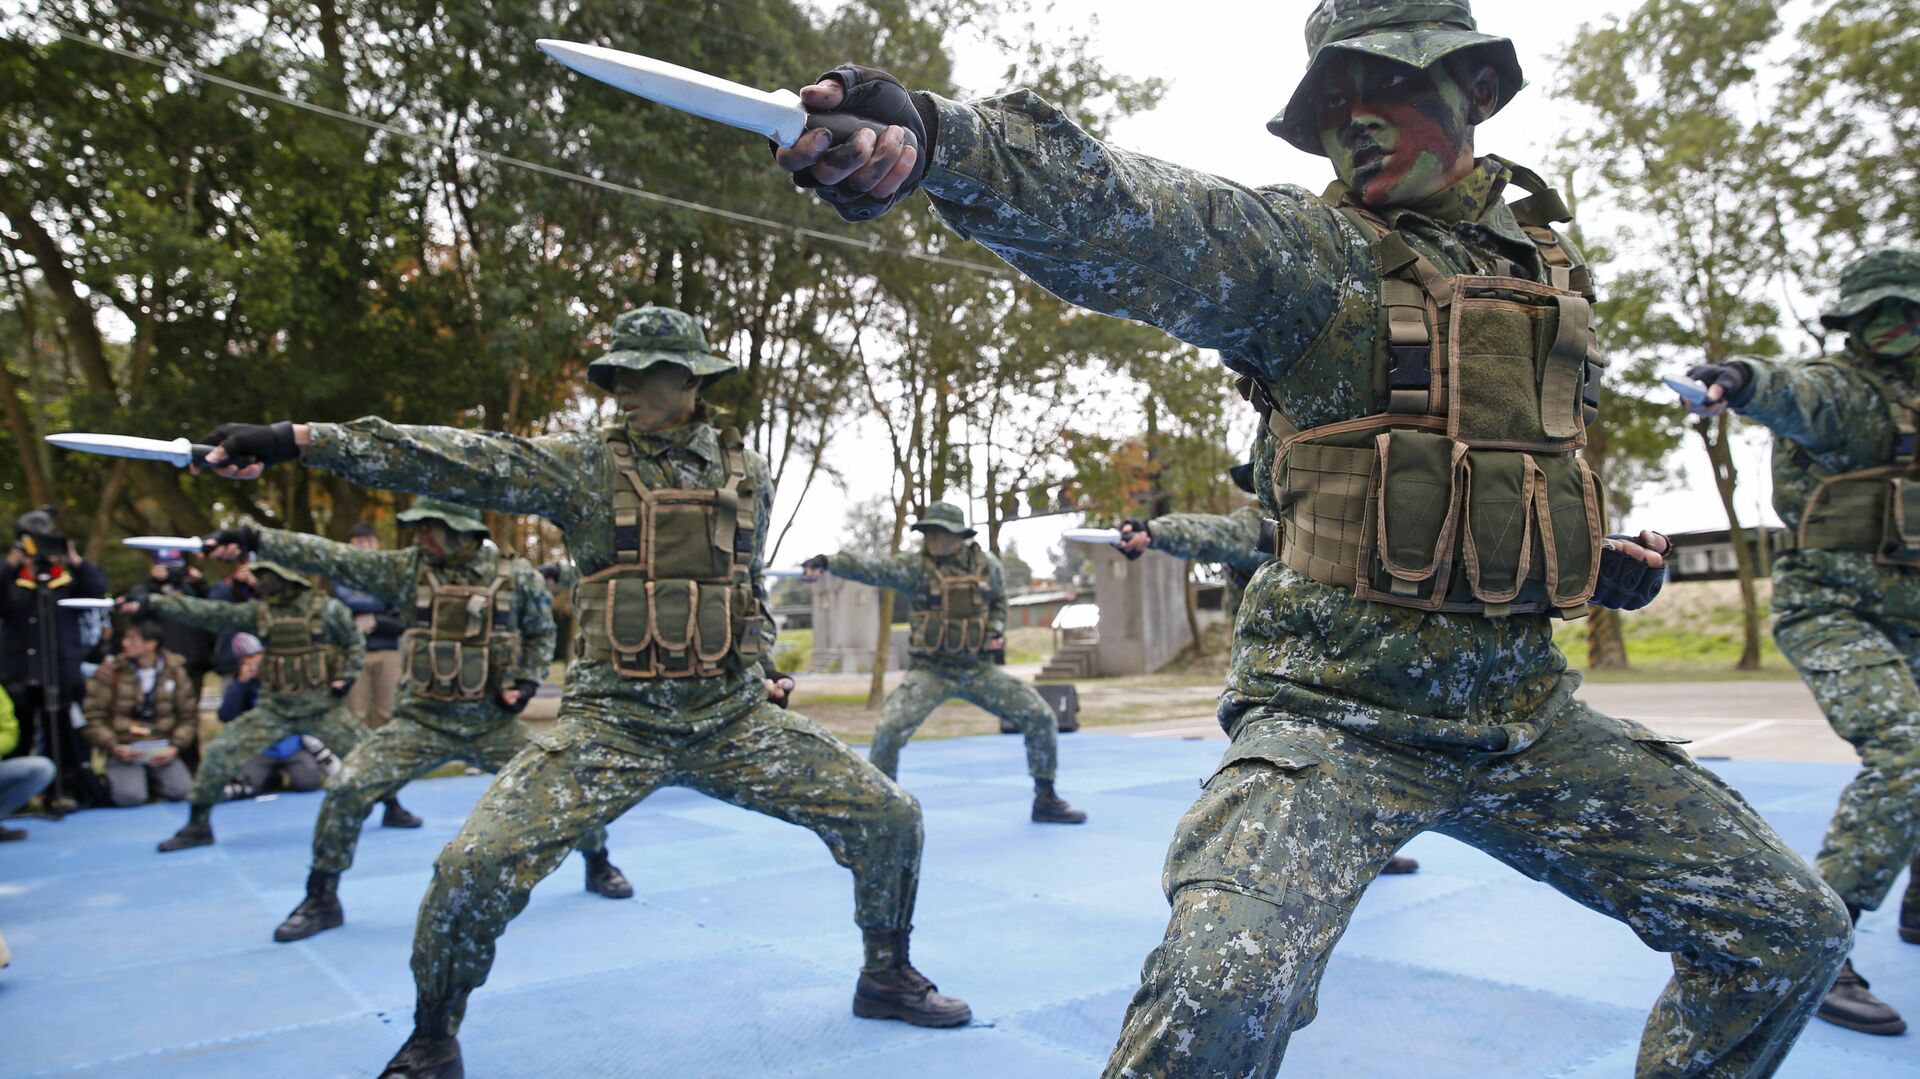 Taiwan's frogmen Marines perform close combat drills just a few kilometers from mainland China on the outlying island of Kinmen, Taiwan (File) - Sputnik International, 1920, 25.05.2022